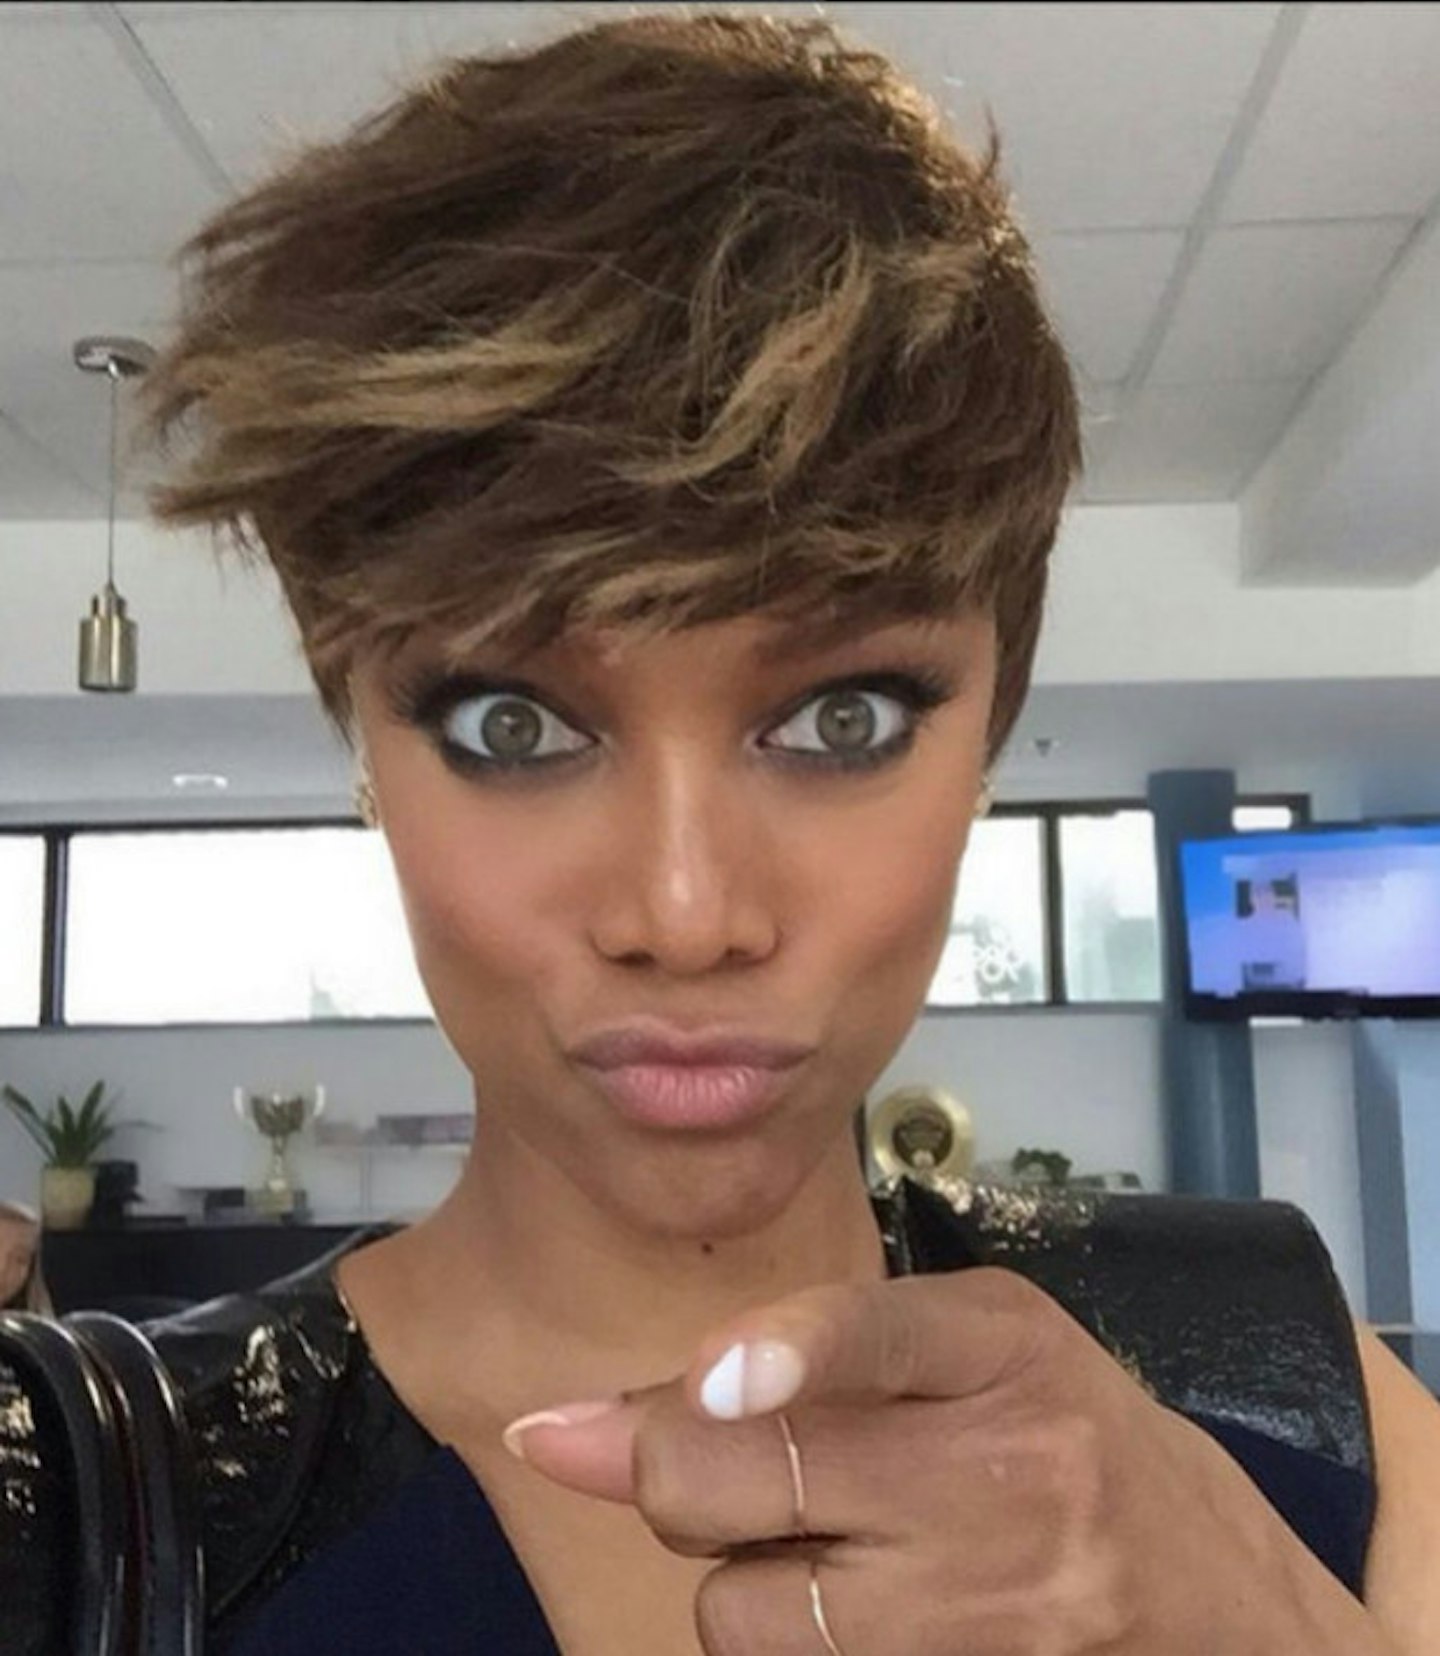 Tyra Banks cancels Top Model